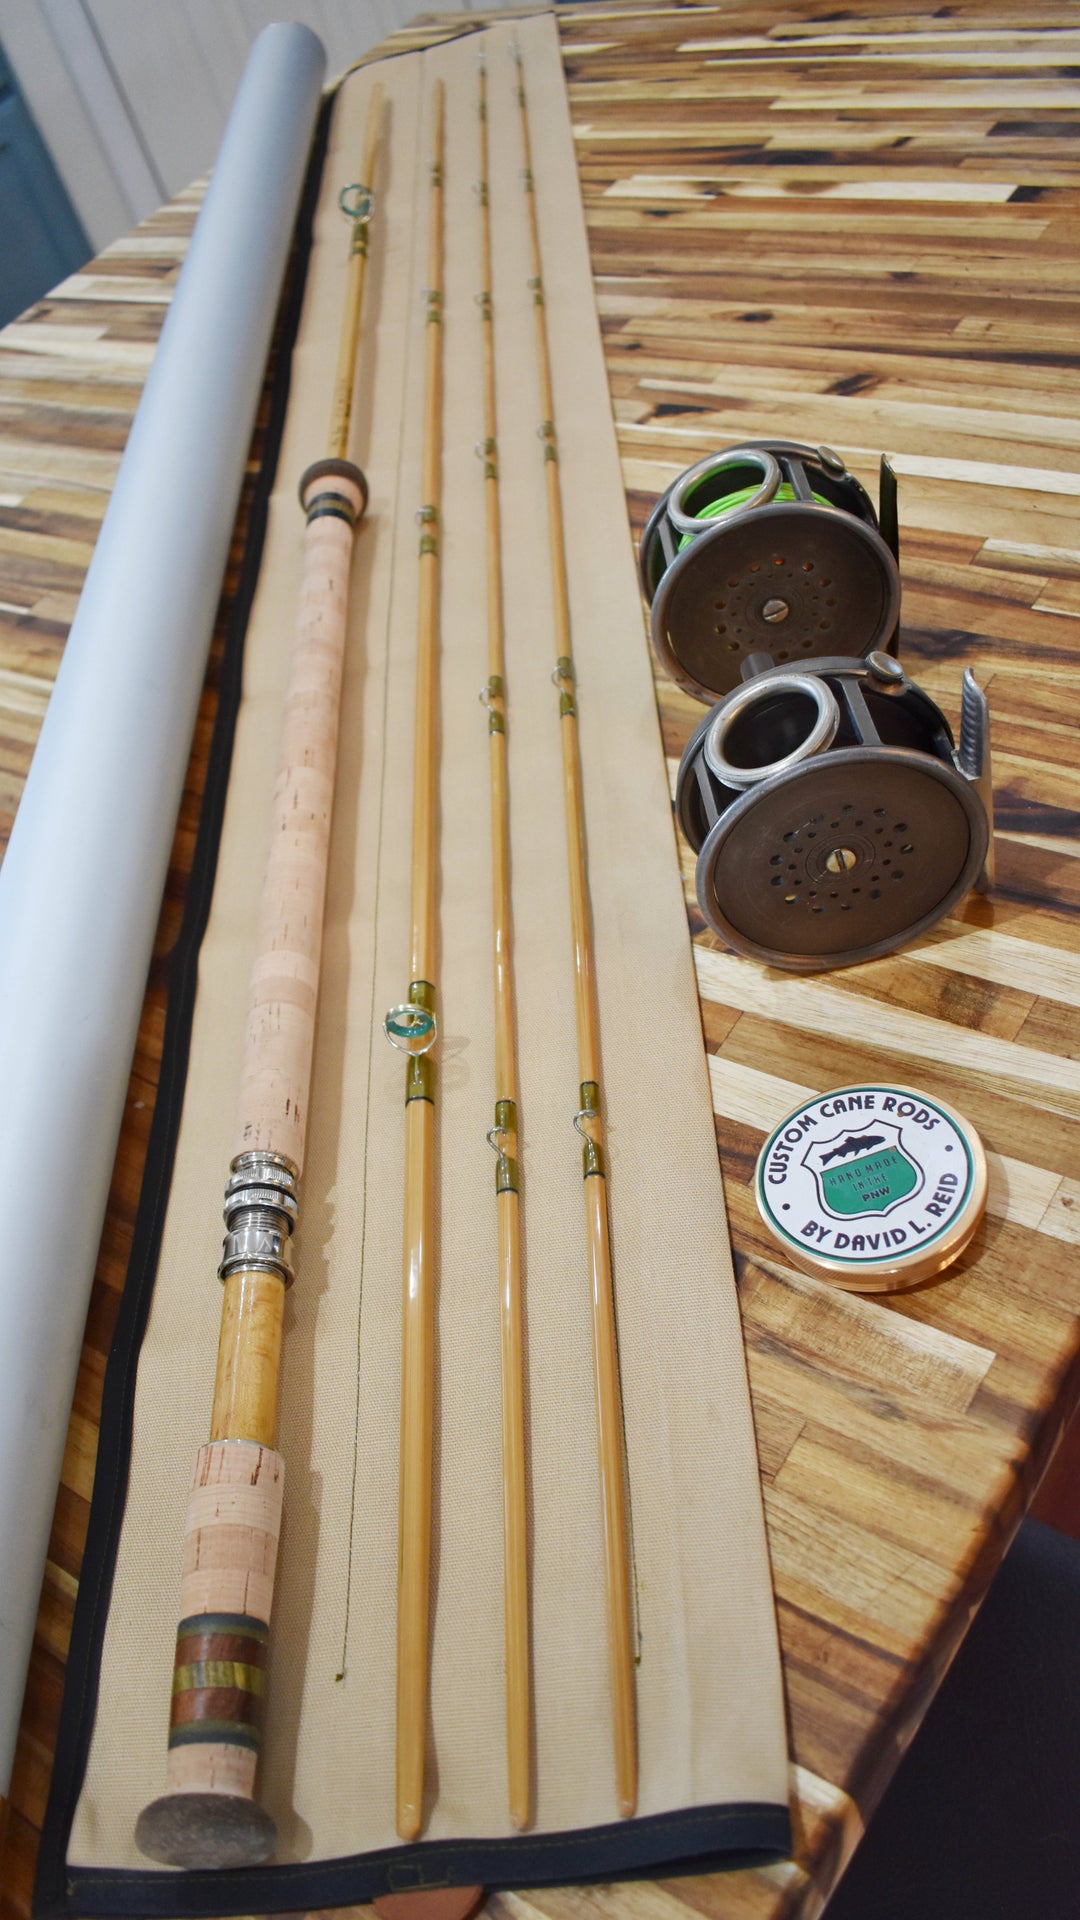 Possibly the 30-06 of Bamboo Spey Rods